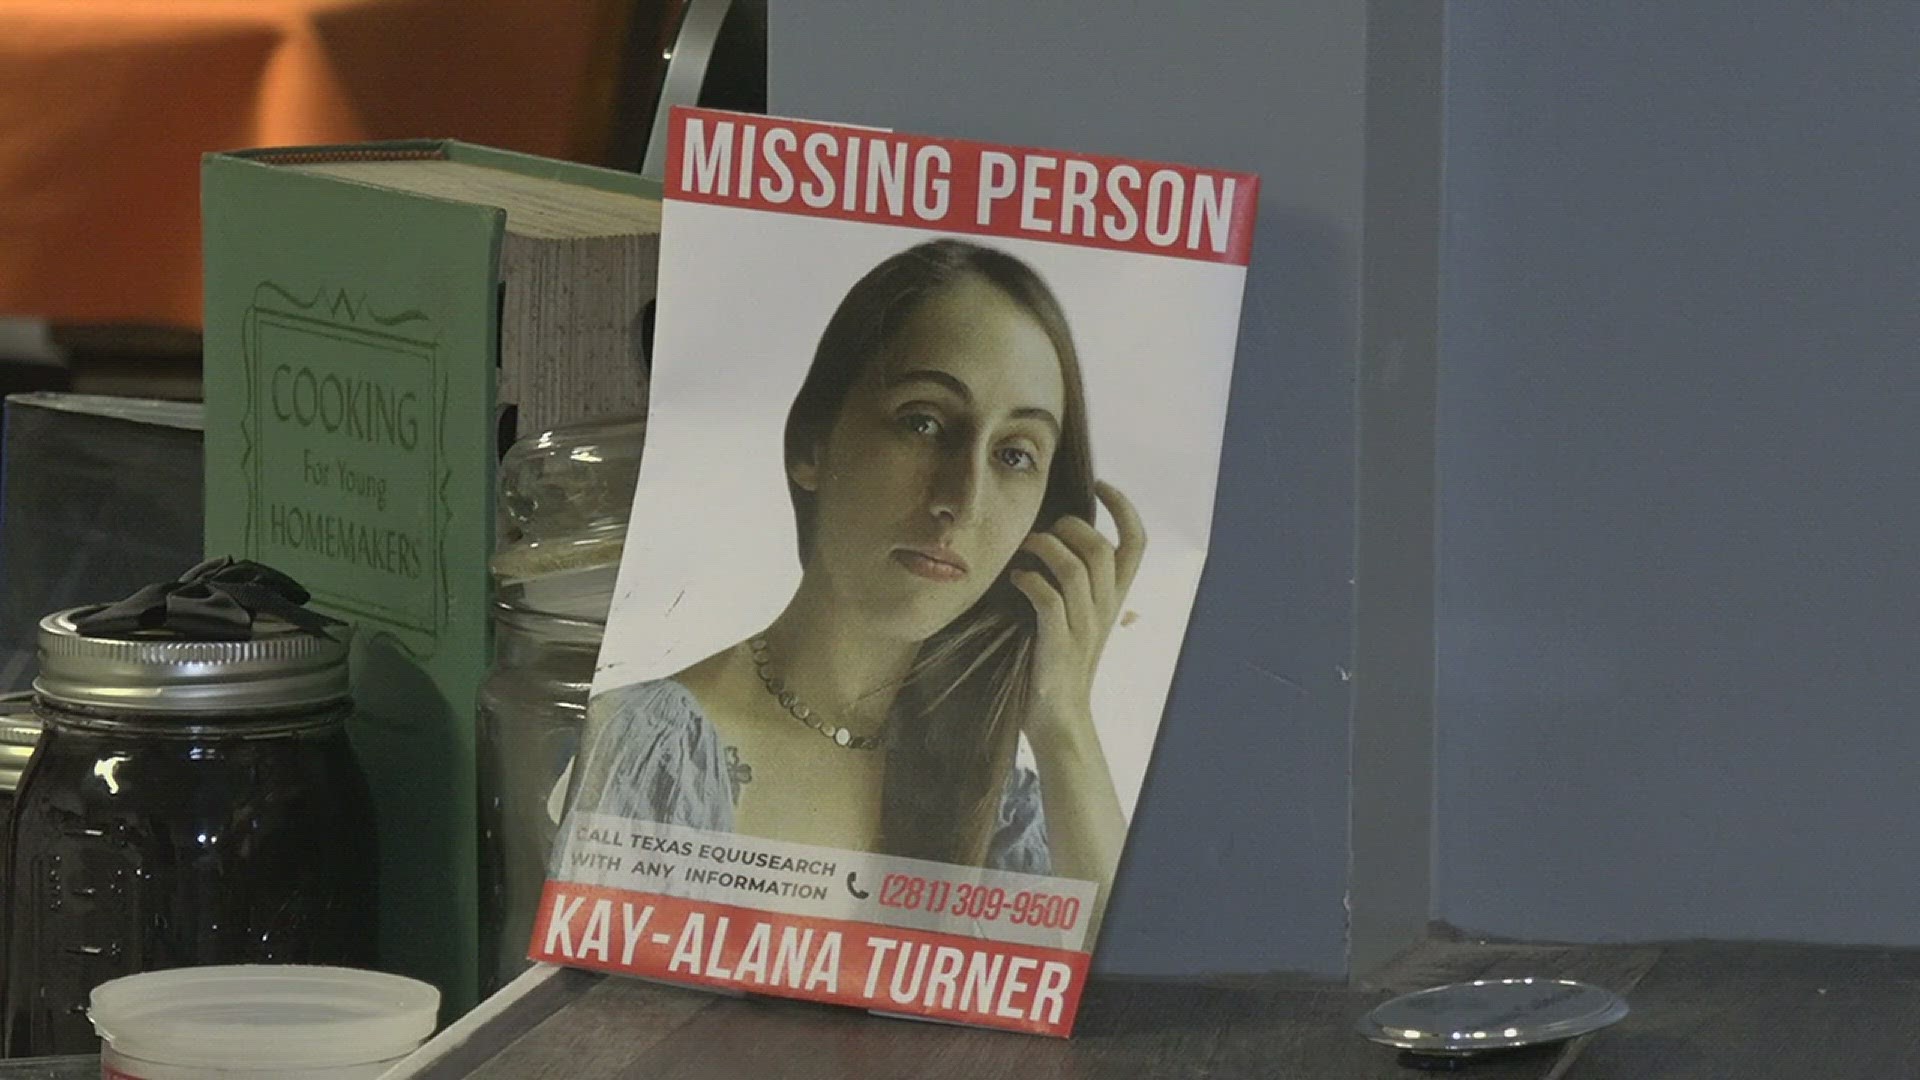 When people are reported missing, it can be a painful reminder for the loved ones of people who have been missing for months, or even years.